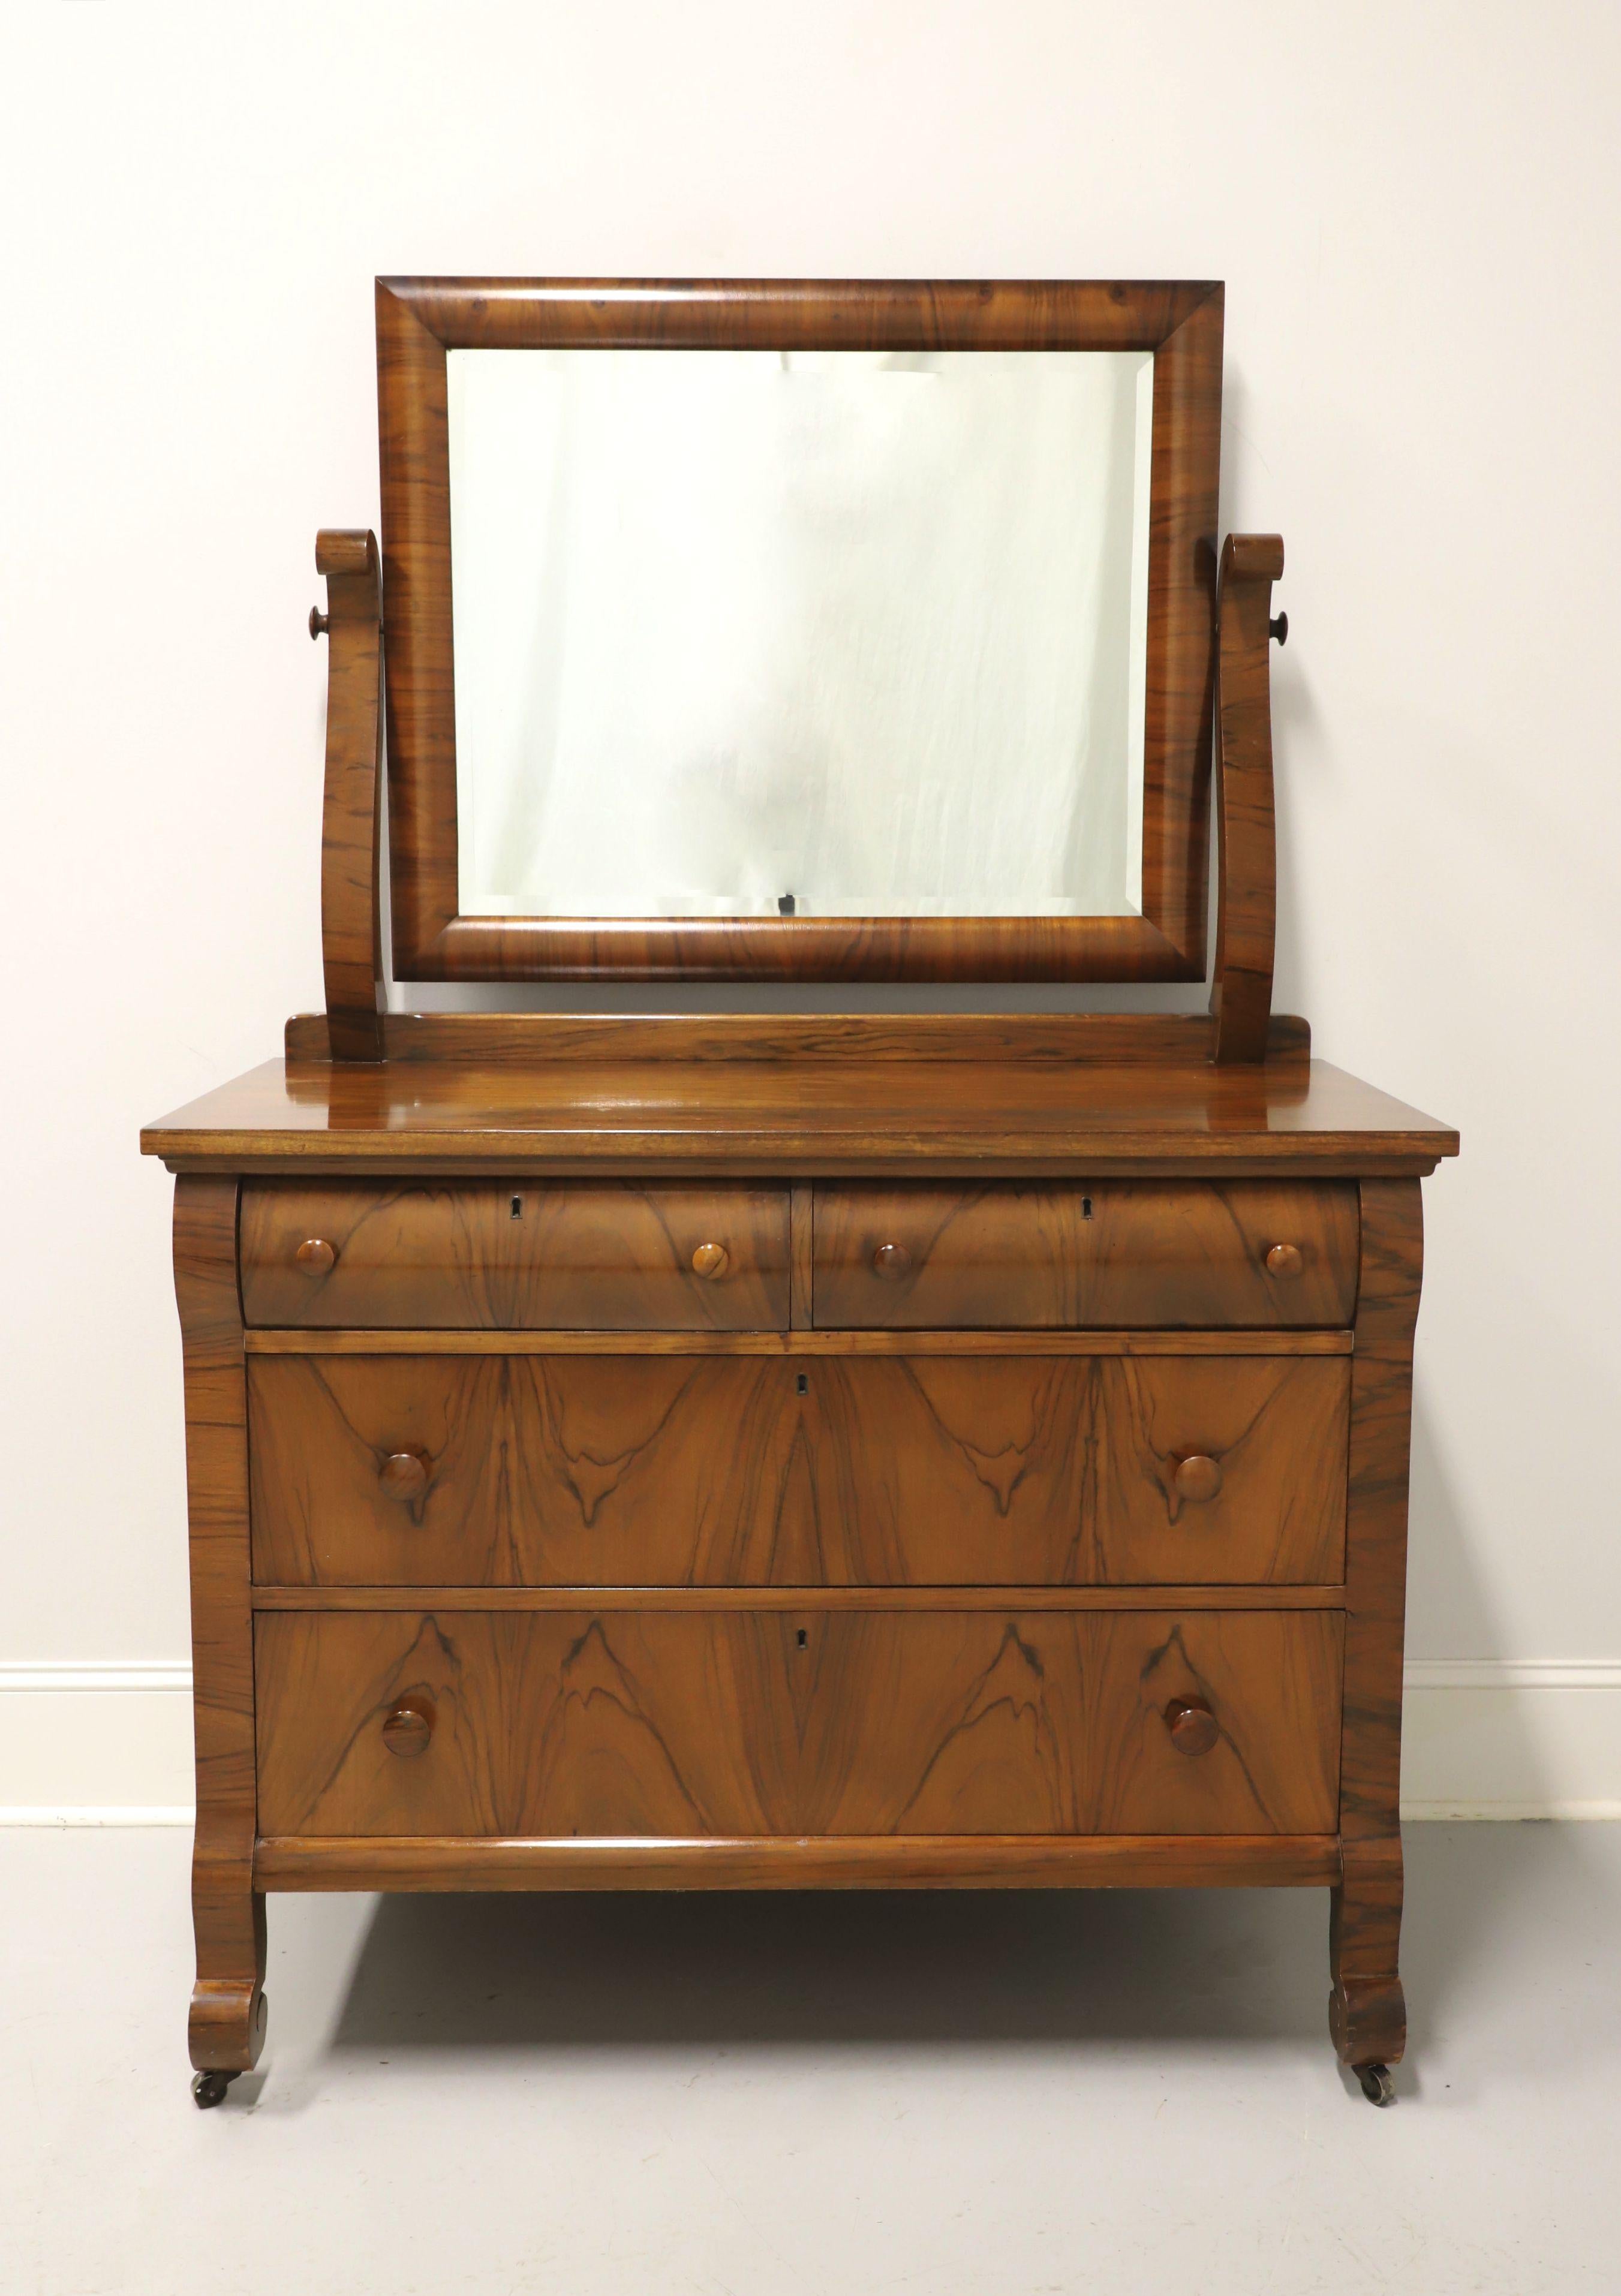 BALKWILL & PATCH Antique 19th Century Empire Style Rosewood Dresser with Mirror For Sale 9